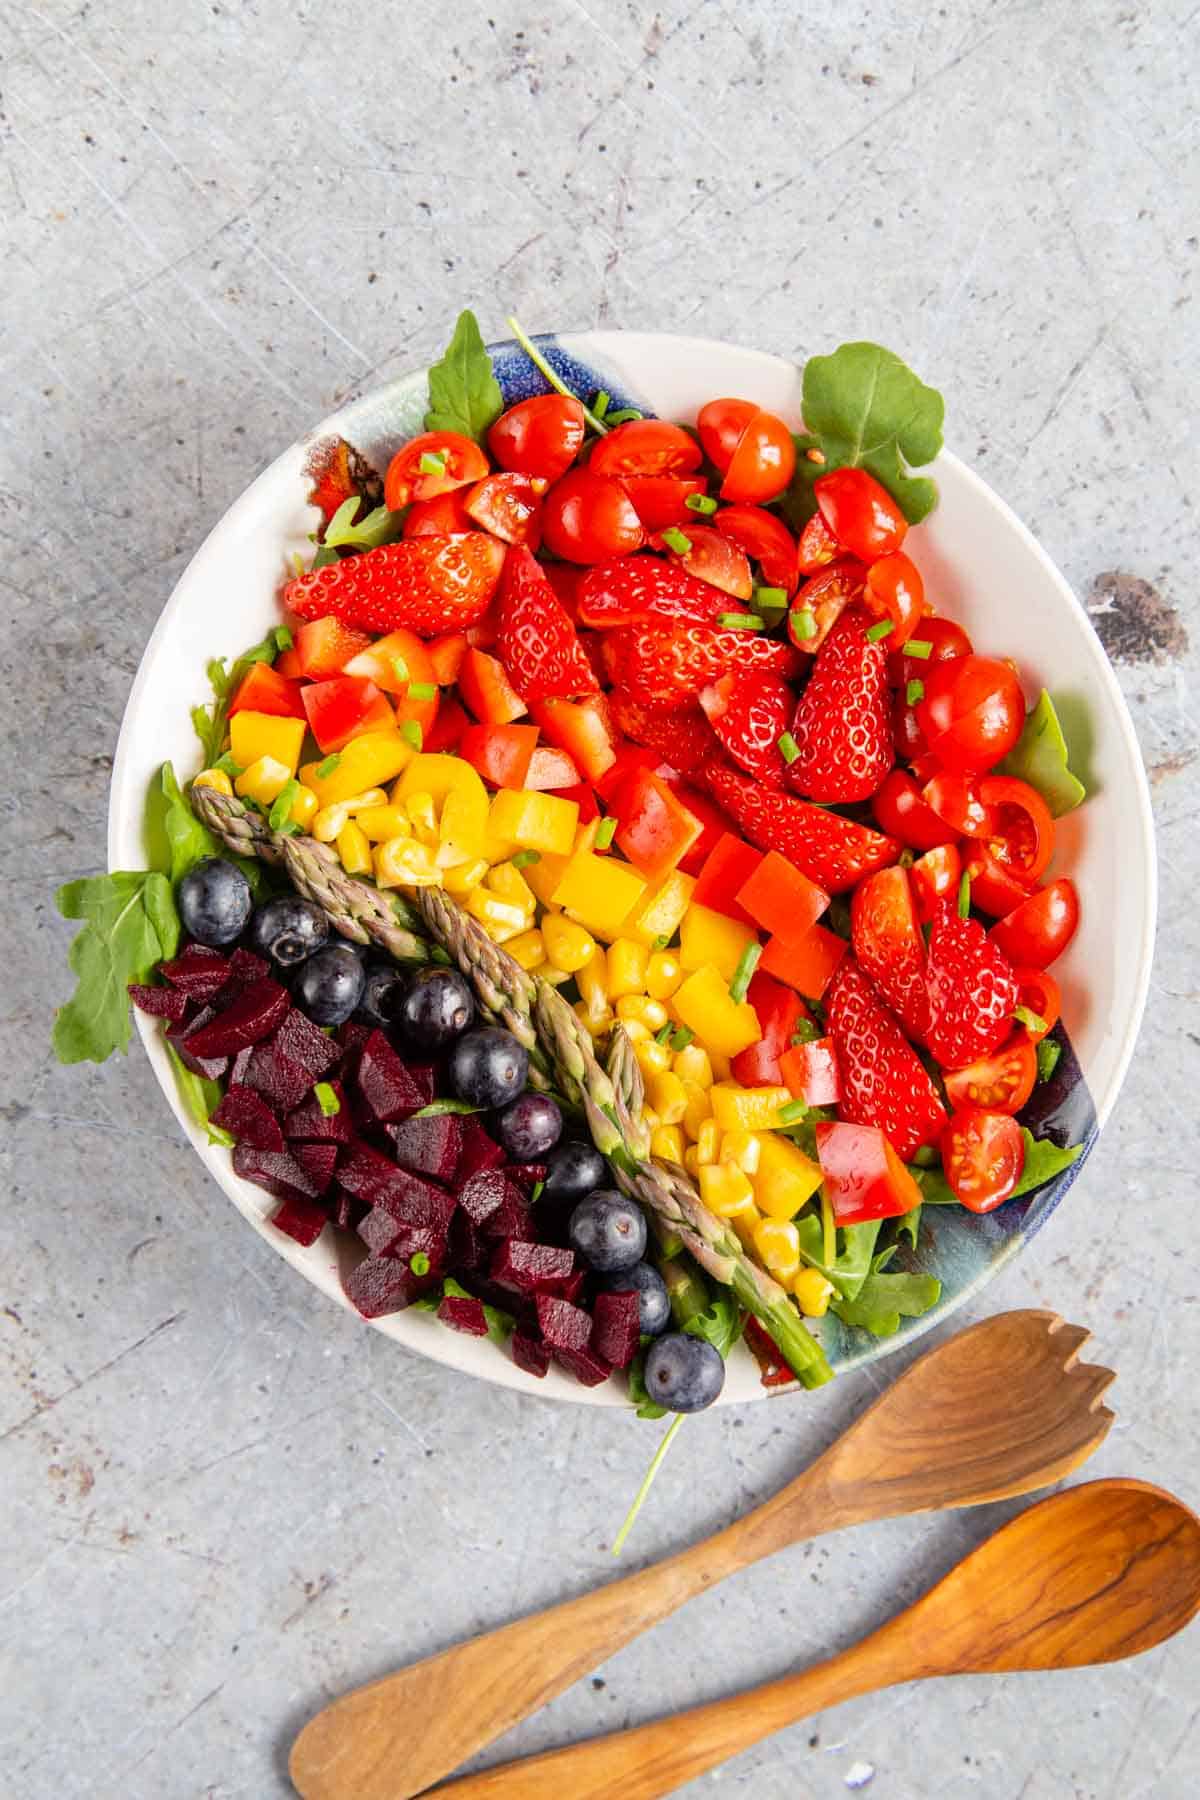 A salad with vegetables arranged into coloured stripes - eating the rainbow!